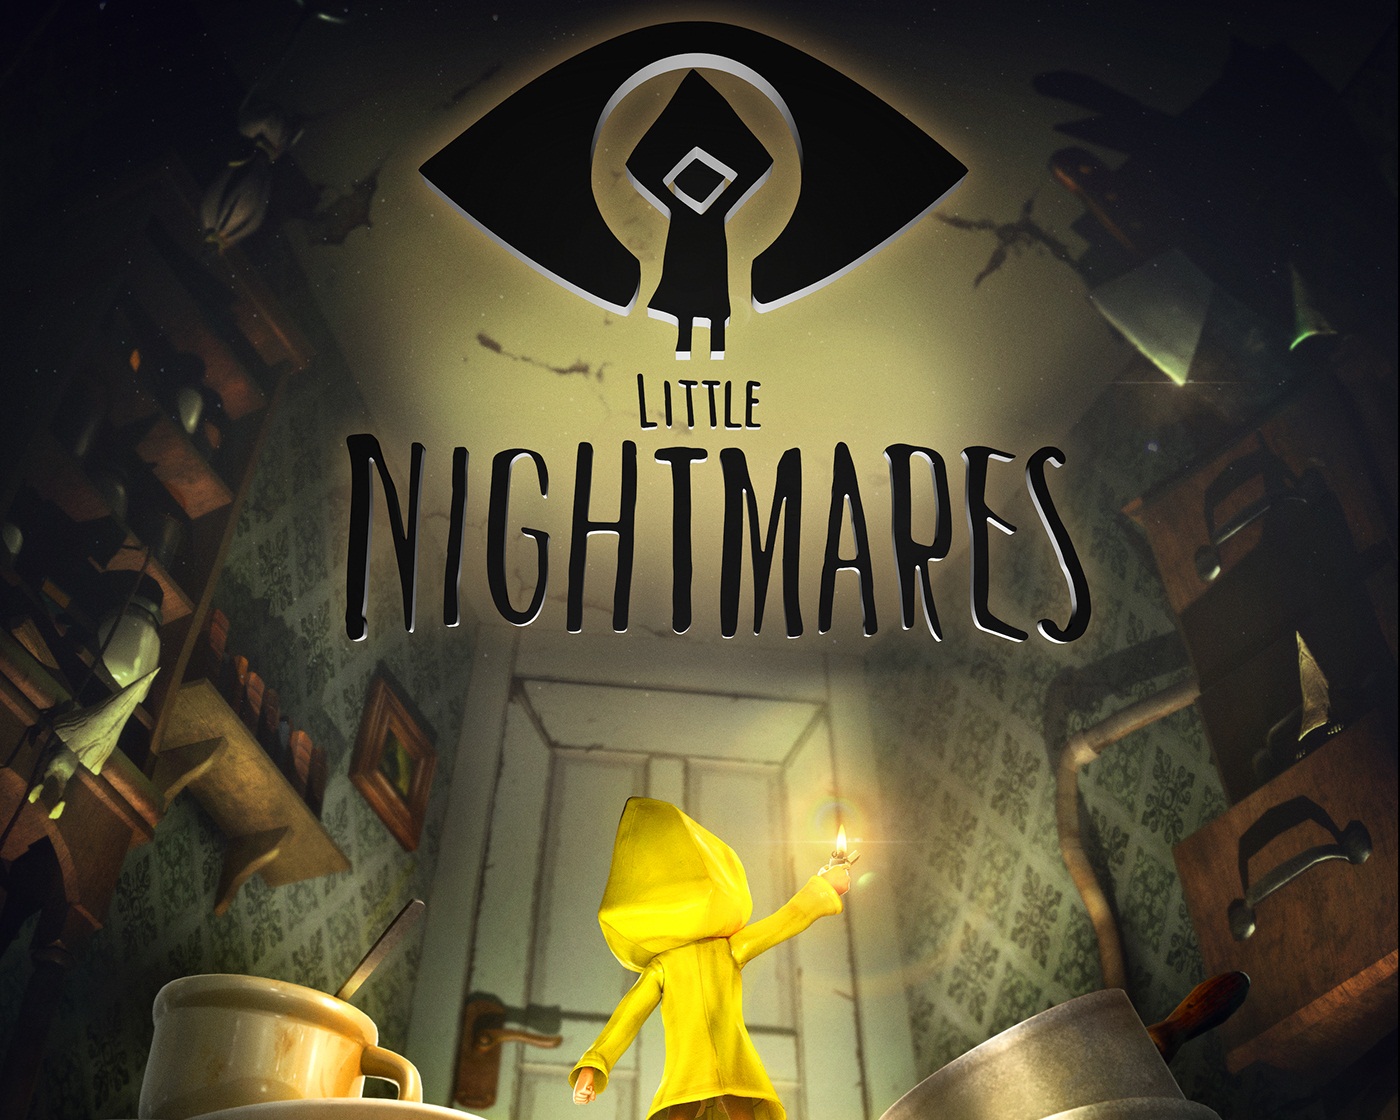 little nightmares free download full game